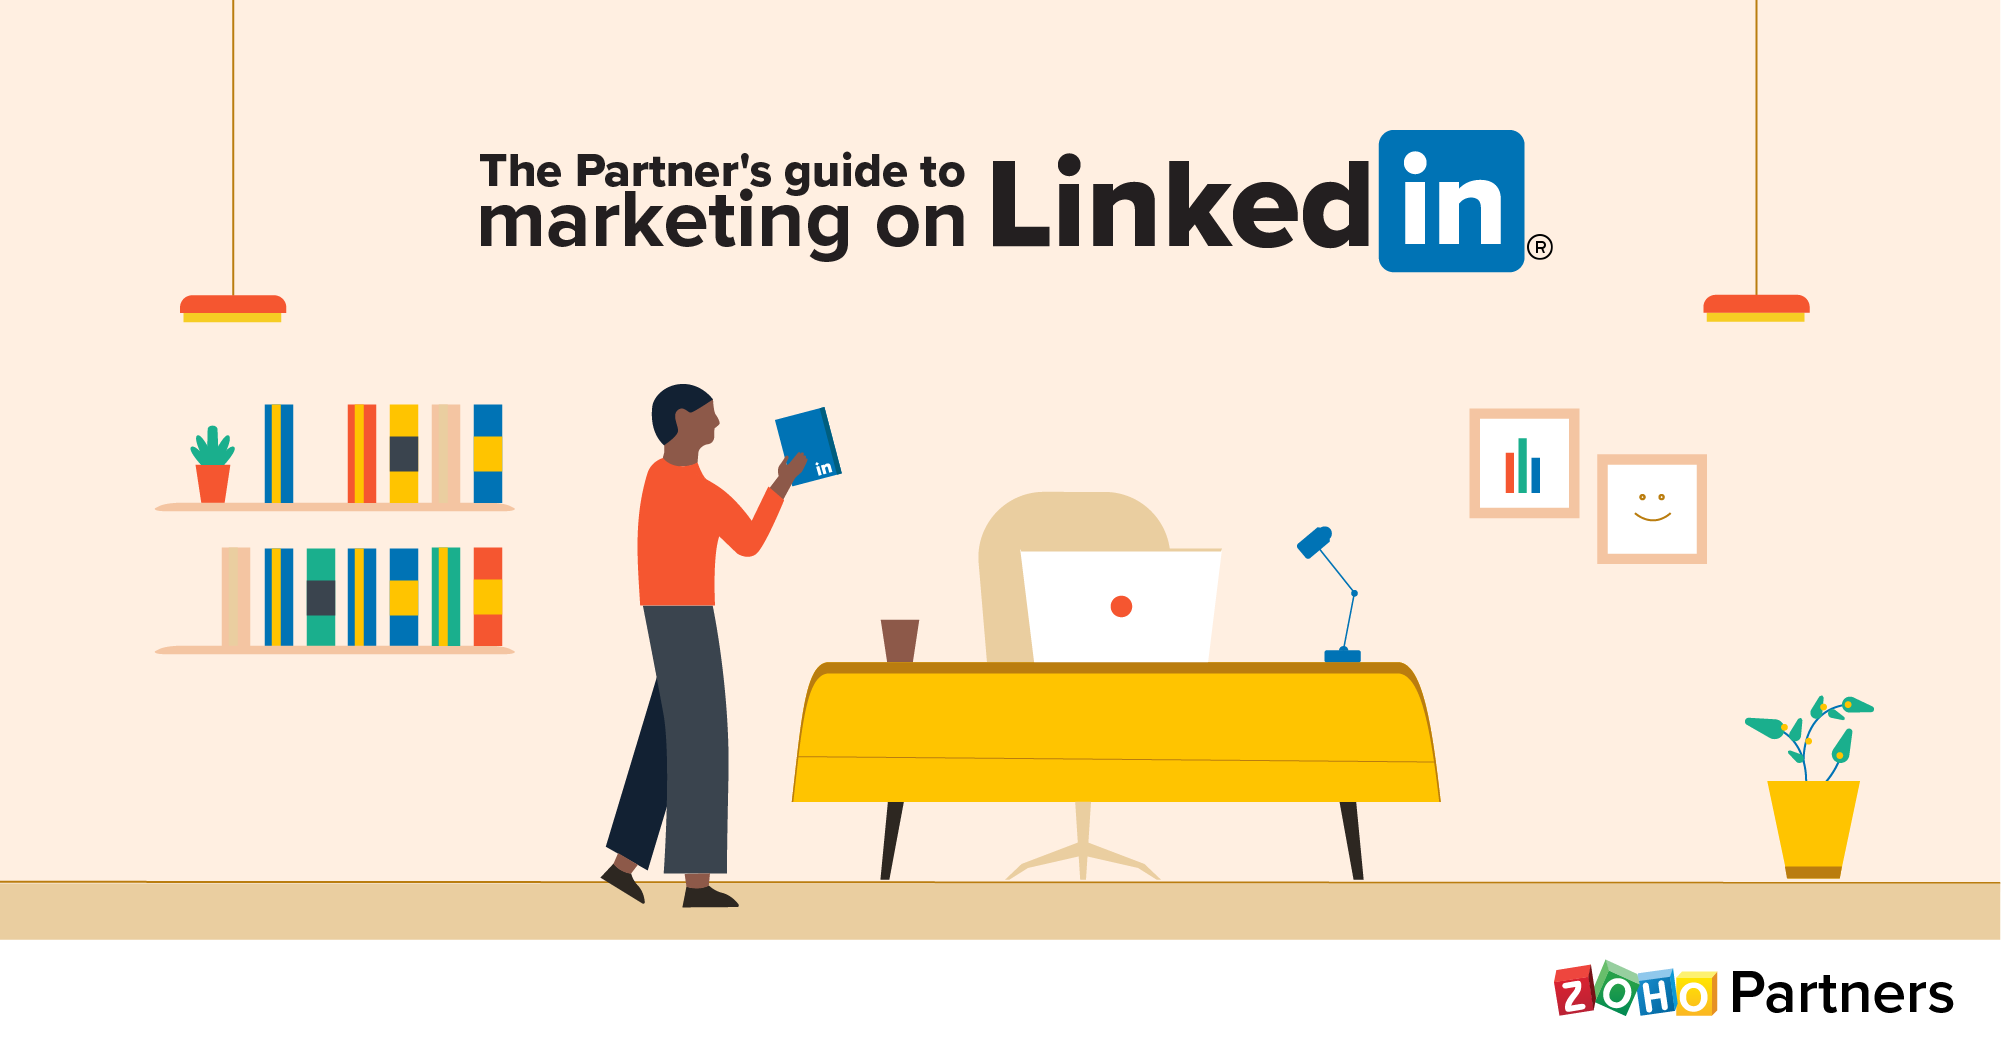 The Partner's guide to marketing on LinkedIn 